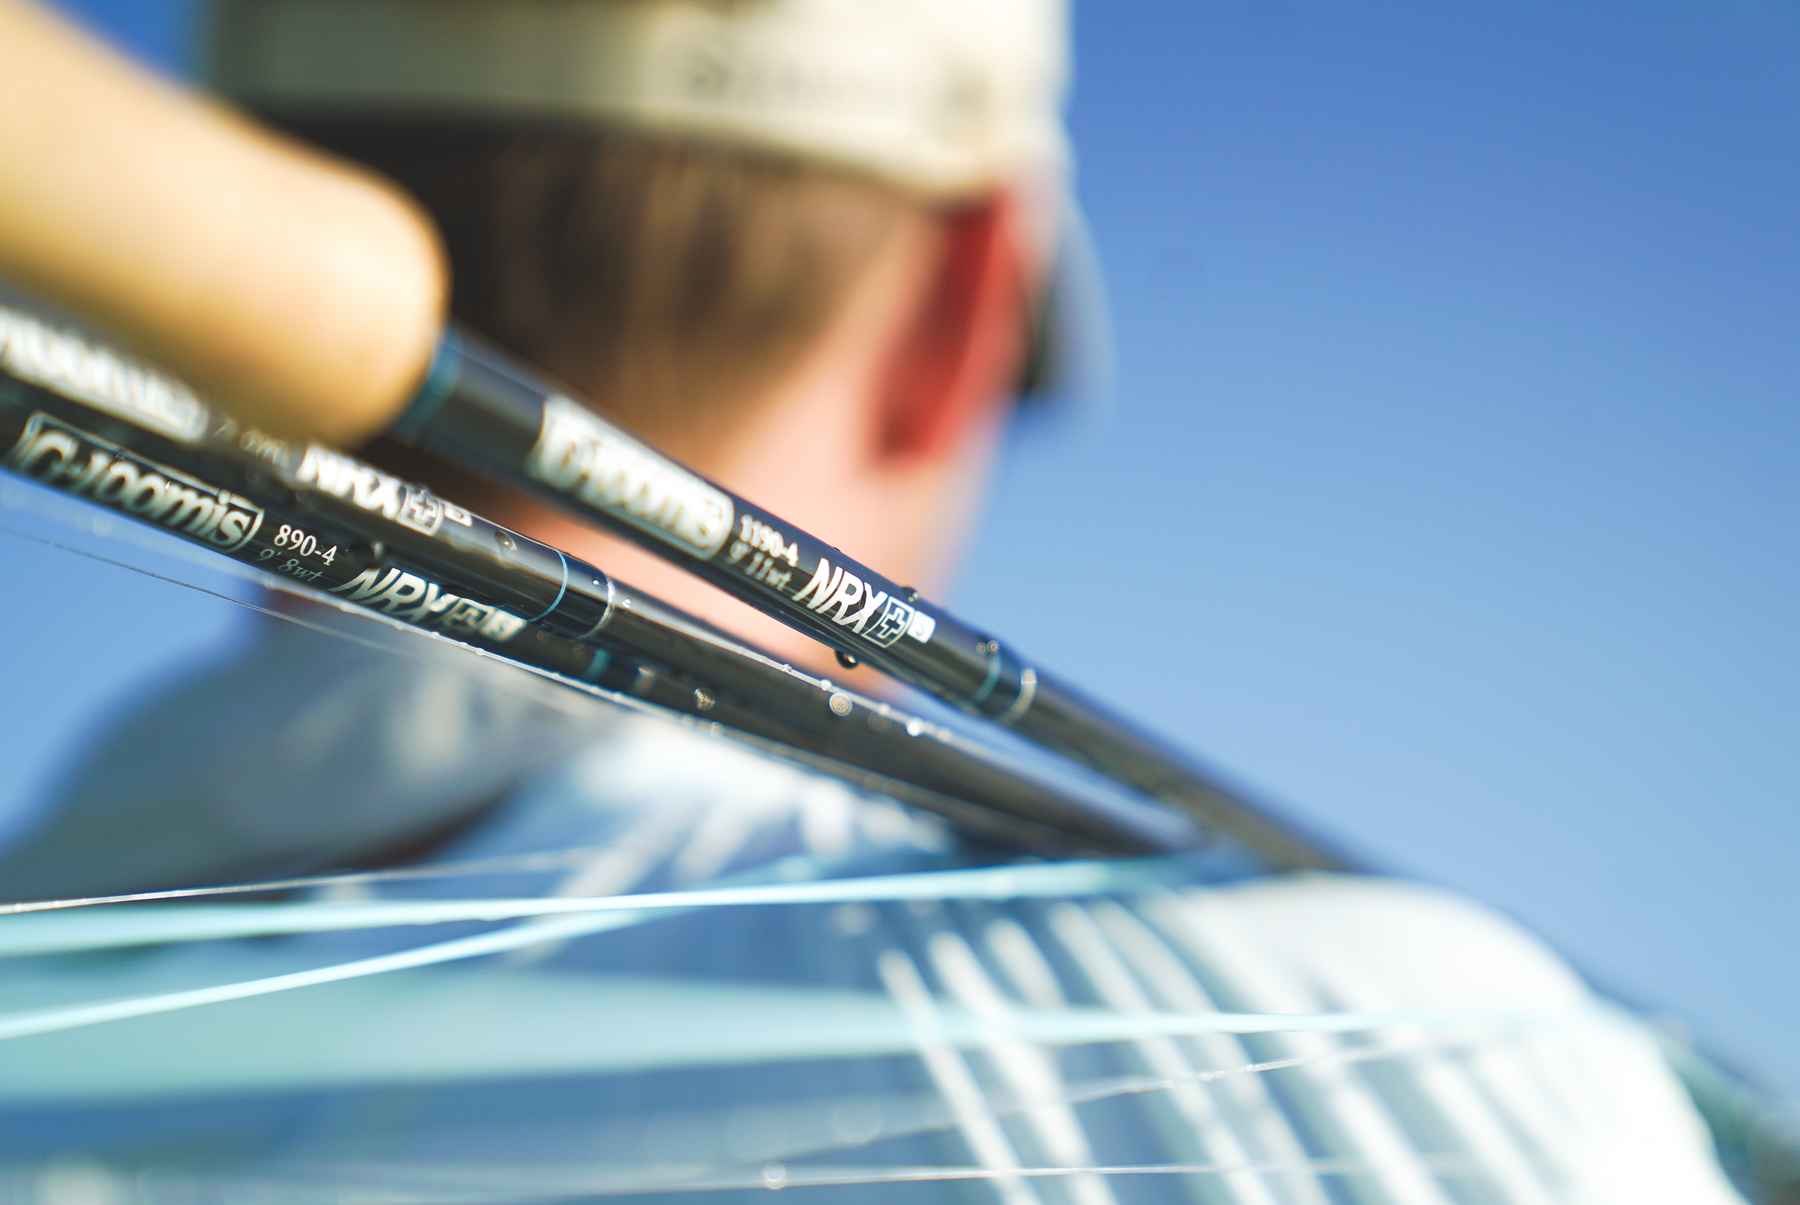 G. Loomis intros the NRX+ fly rod, successor to the wildly popular